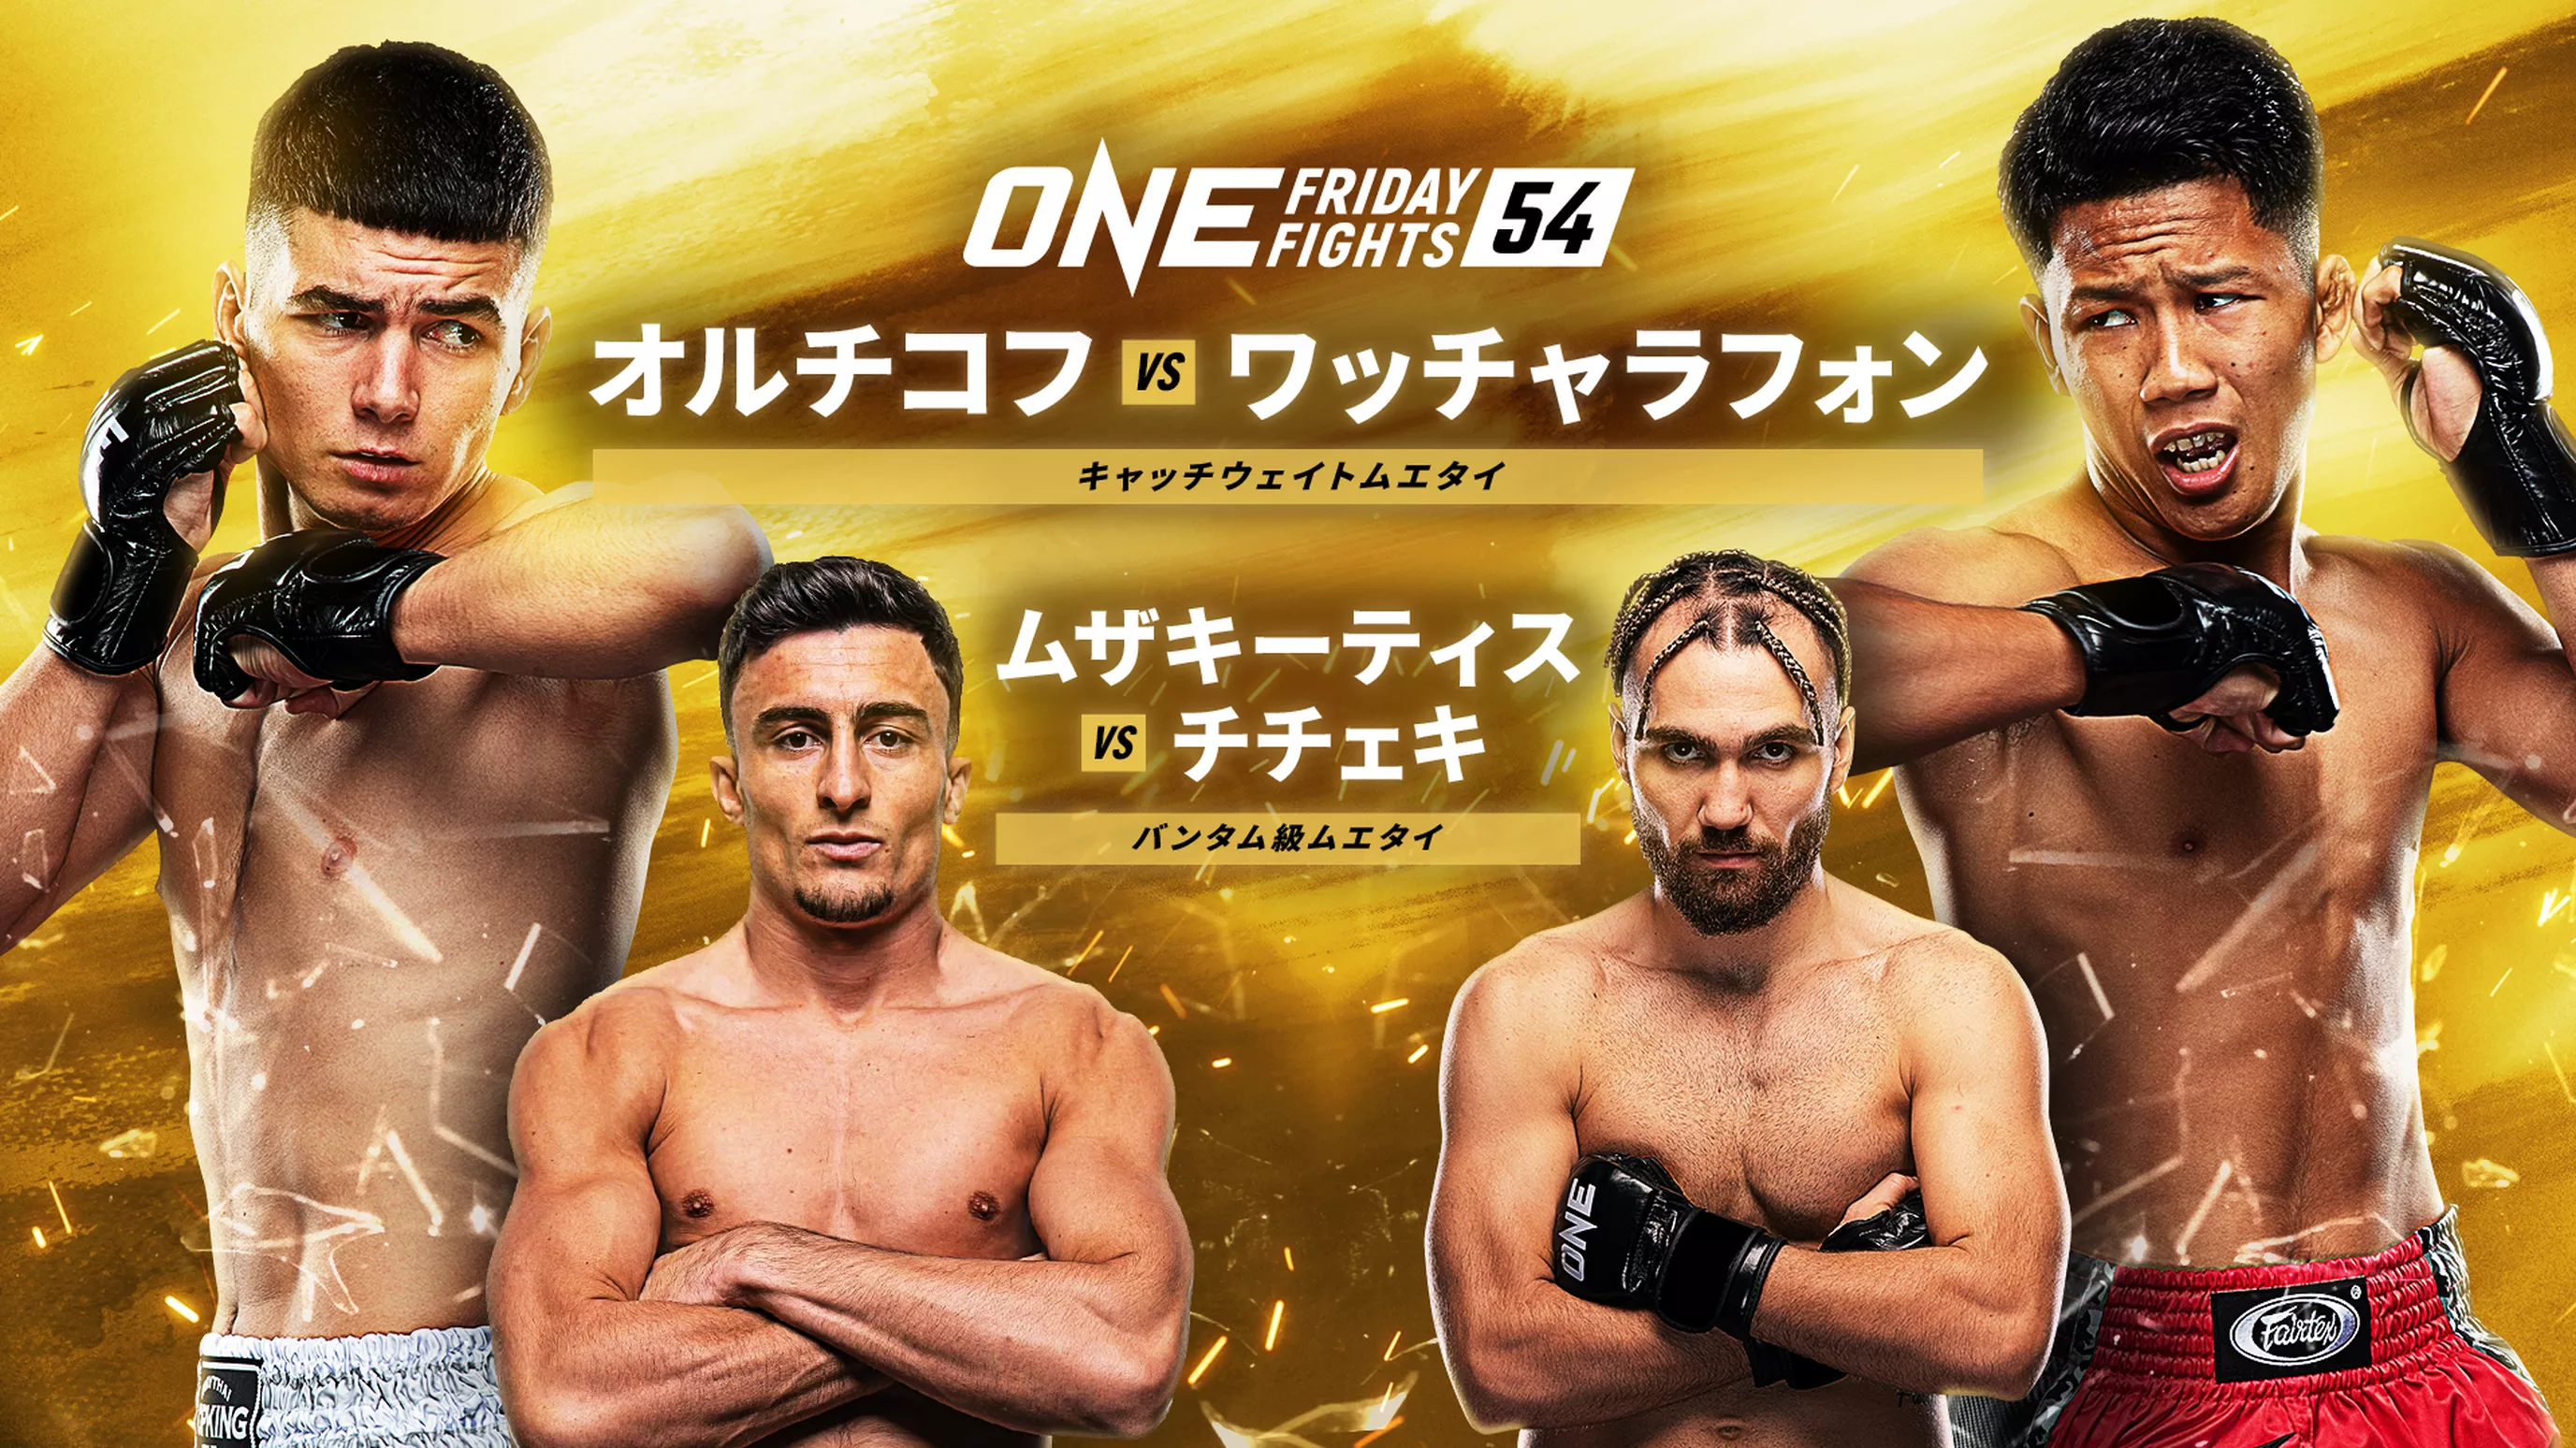 ONE Friday Fights 54